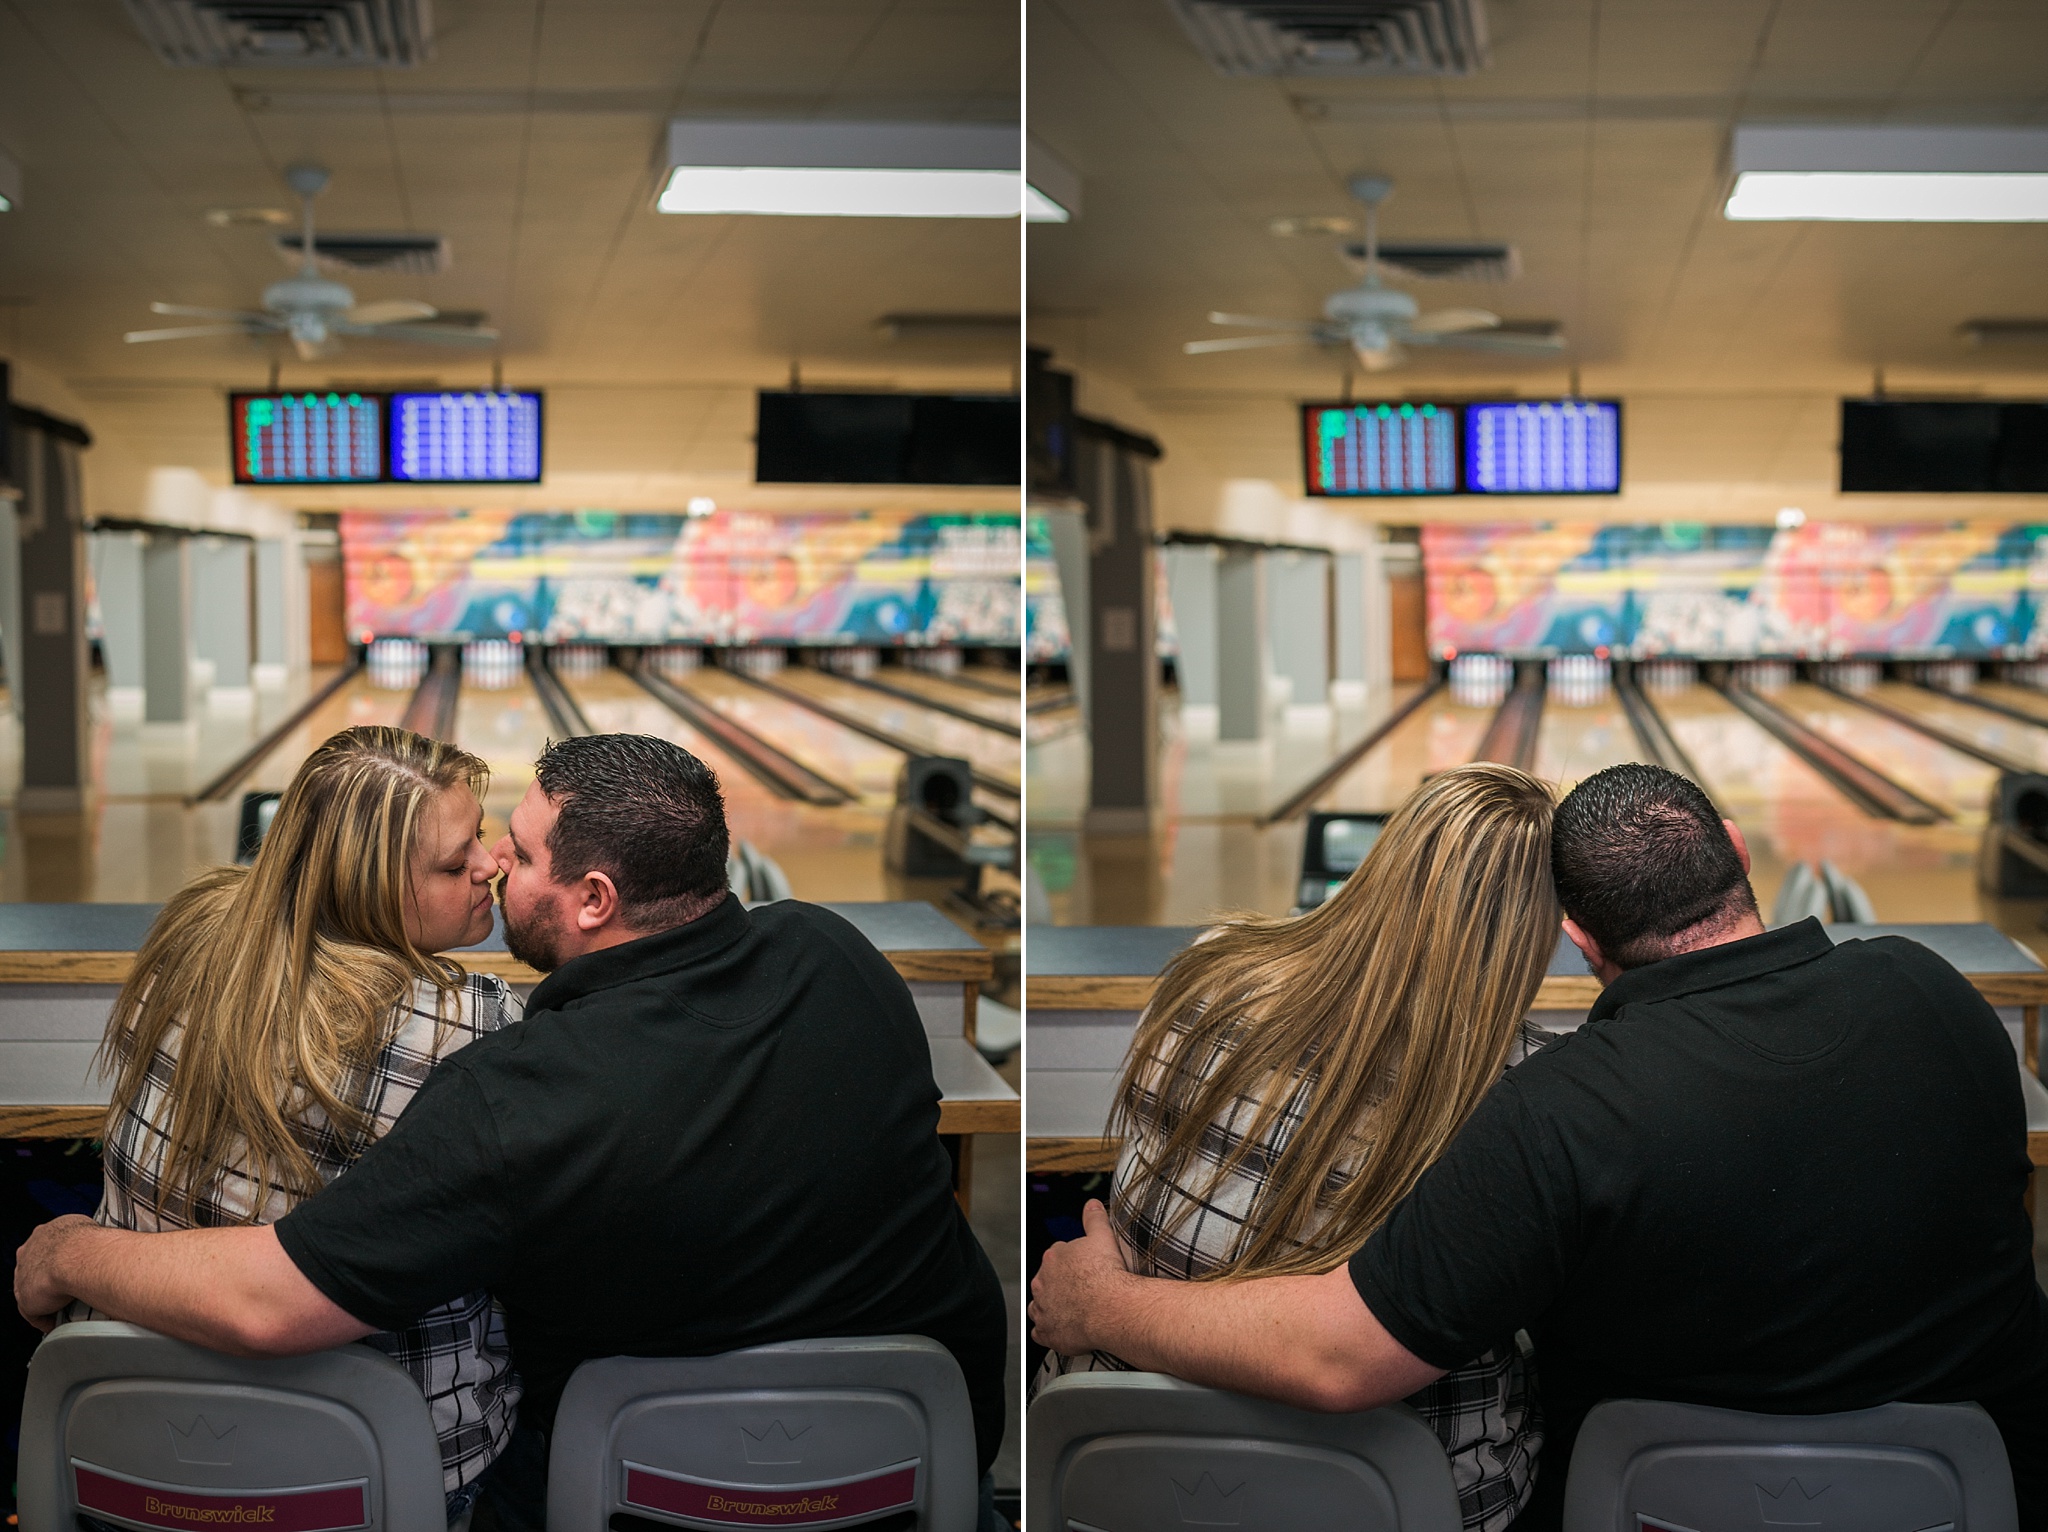 Couple kissing during their bowling alley engagement session. Briana & Kevin’s Devil’s Backbone and Sweetheart Lanes Engagement Session by Colorado Engagement Photographer, Jennifer Garza. Devil's Backbone Engagement, Devil's Backbone Engagement Session, Loveland Engagement Session, Colorado Engagement Photography, Colorado Engagement Photos, Sweetheart Lanes Bowling Alley, Bowling Alley Engagement, Bowling Engagement Session, Bowling Engagement Photography, Wedding Inspo, Colorado Wedding, Colorado Bride, Brides of Colorado, Bride to Be, Couples Goals